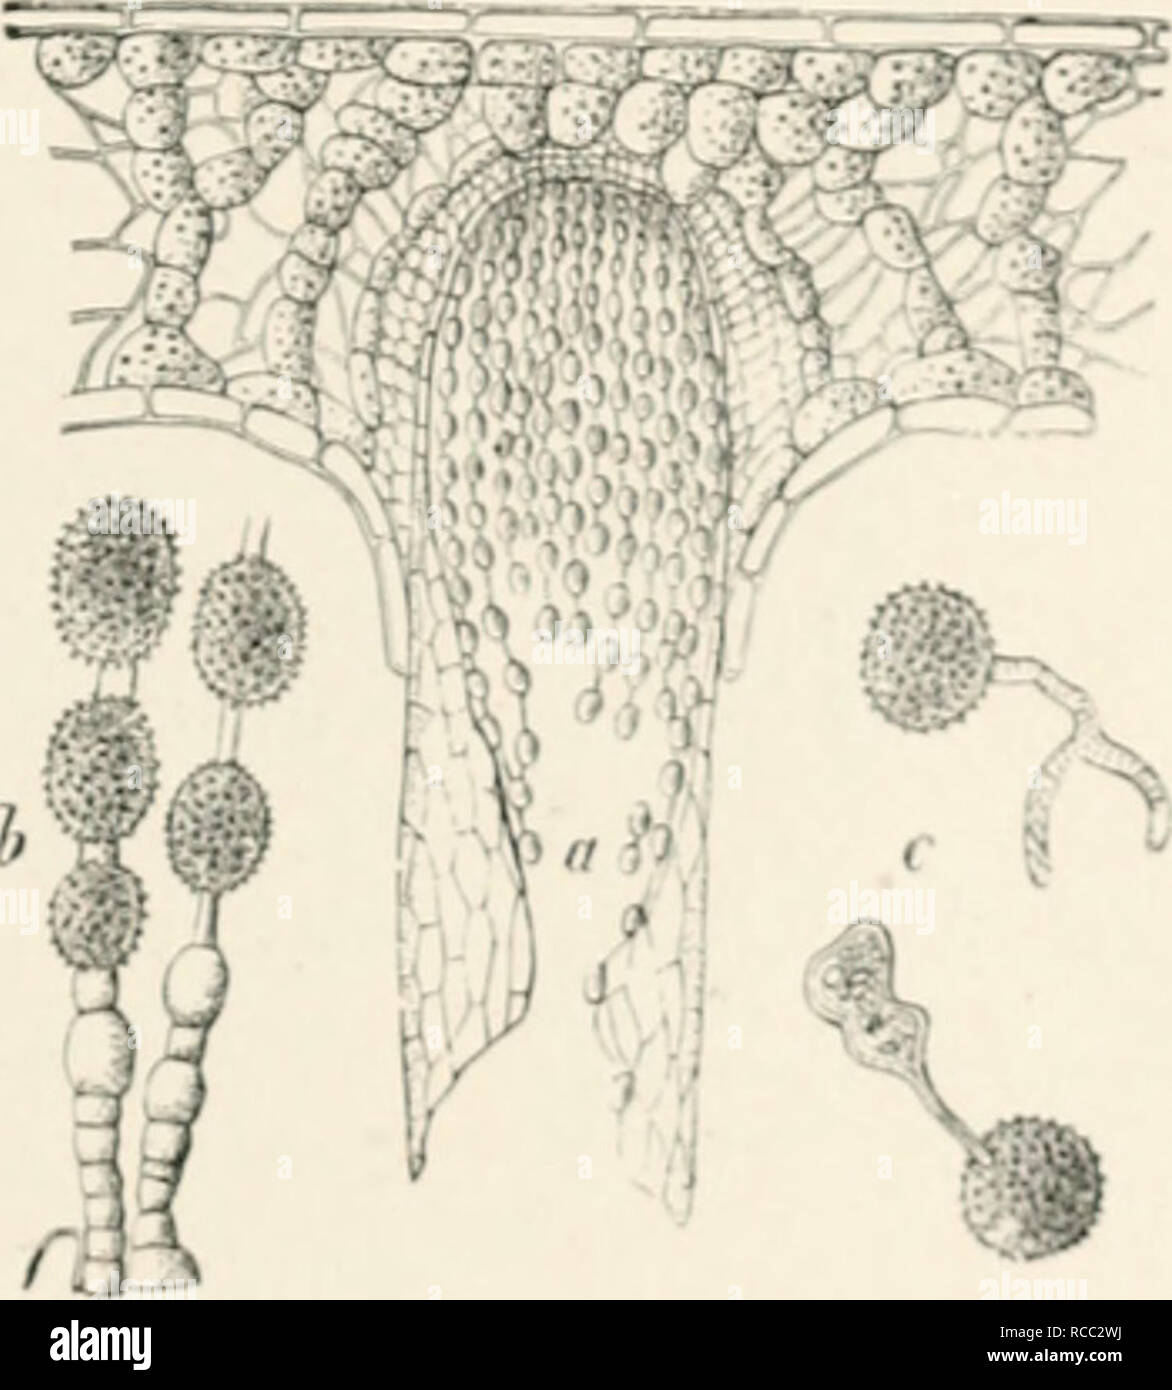 . Diseases of plants induced by cryptogamuc parasites; introduction to the study of pathogenic fungi, slime-fungi, bacteria, and algae. English ed. by William G. Smith. Plant diseases; Parasitic plants. Fig. 205.âCnh/ptottpo'a Gotppertiano. Aecidia on the under surface of needles of Silver Fir. (v. Tubeuf del.). Kiii. 20d.âAecidiuin in a needle of Silver Fir (much enlarjjed). h. Series of aecidiospores and intermediate cells. 'â , (icniiinatin^' aecidiospores. (.ftcr R. HartiK.) This aecidium is also fouml on Alii&lt;s rrfi/K'/onini in I'jiju'r iJavaria. Barclayella deformans Diet.' This lia. Stock Photo